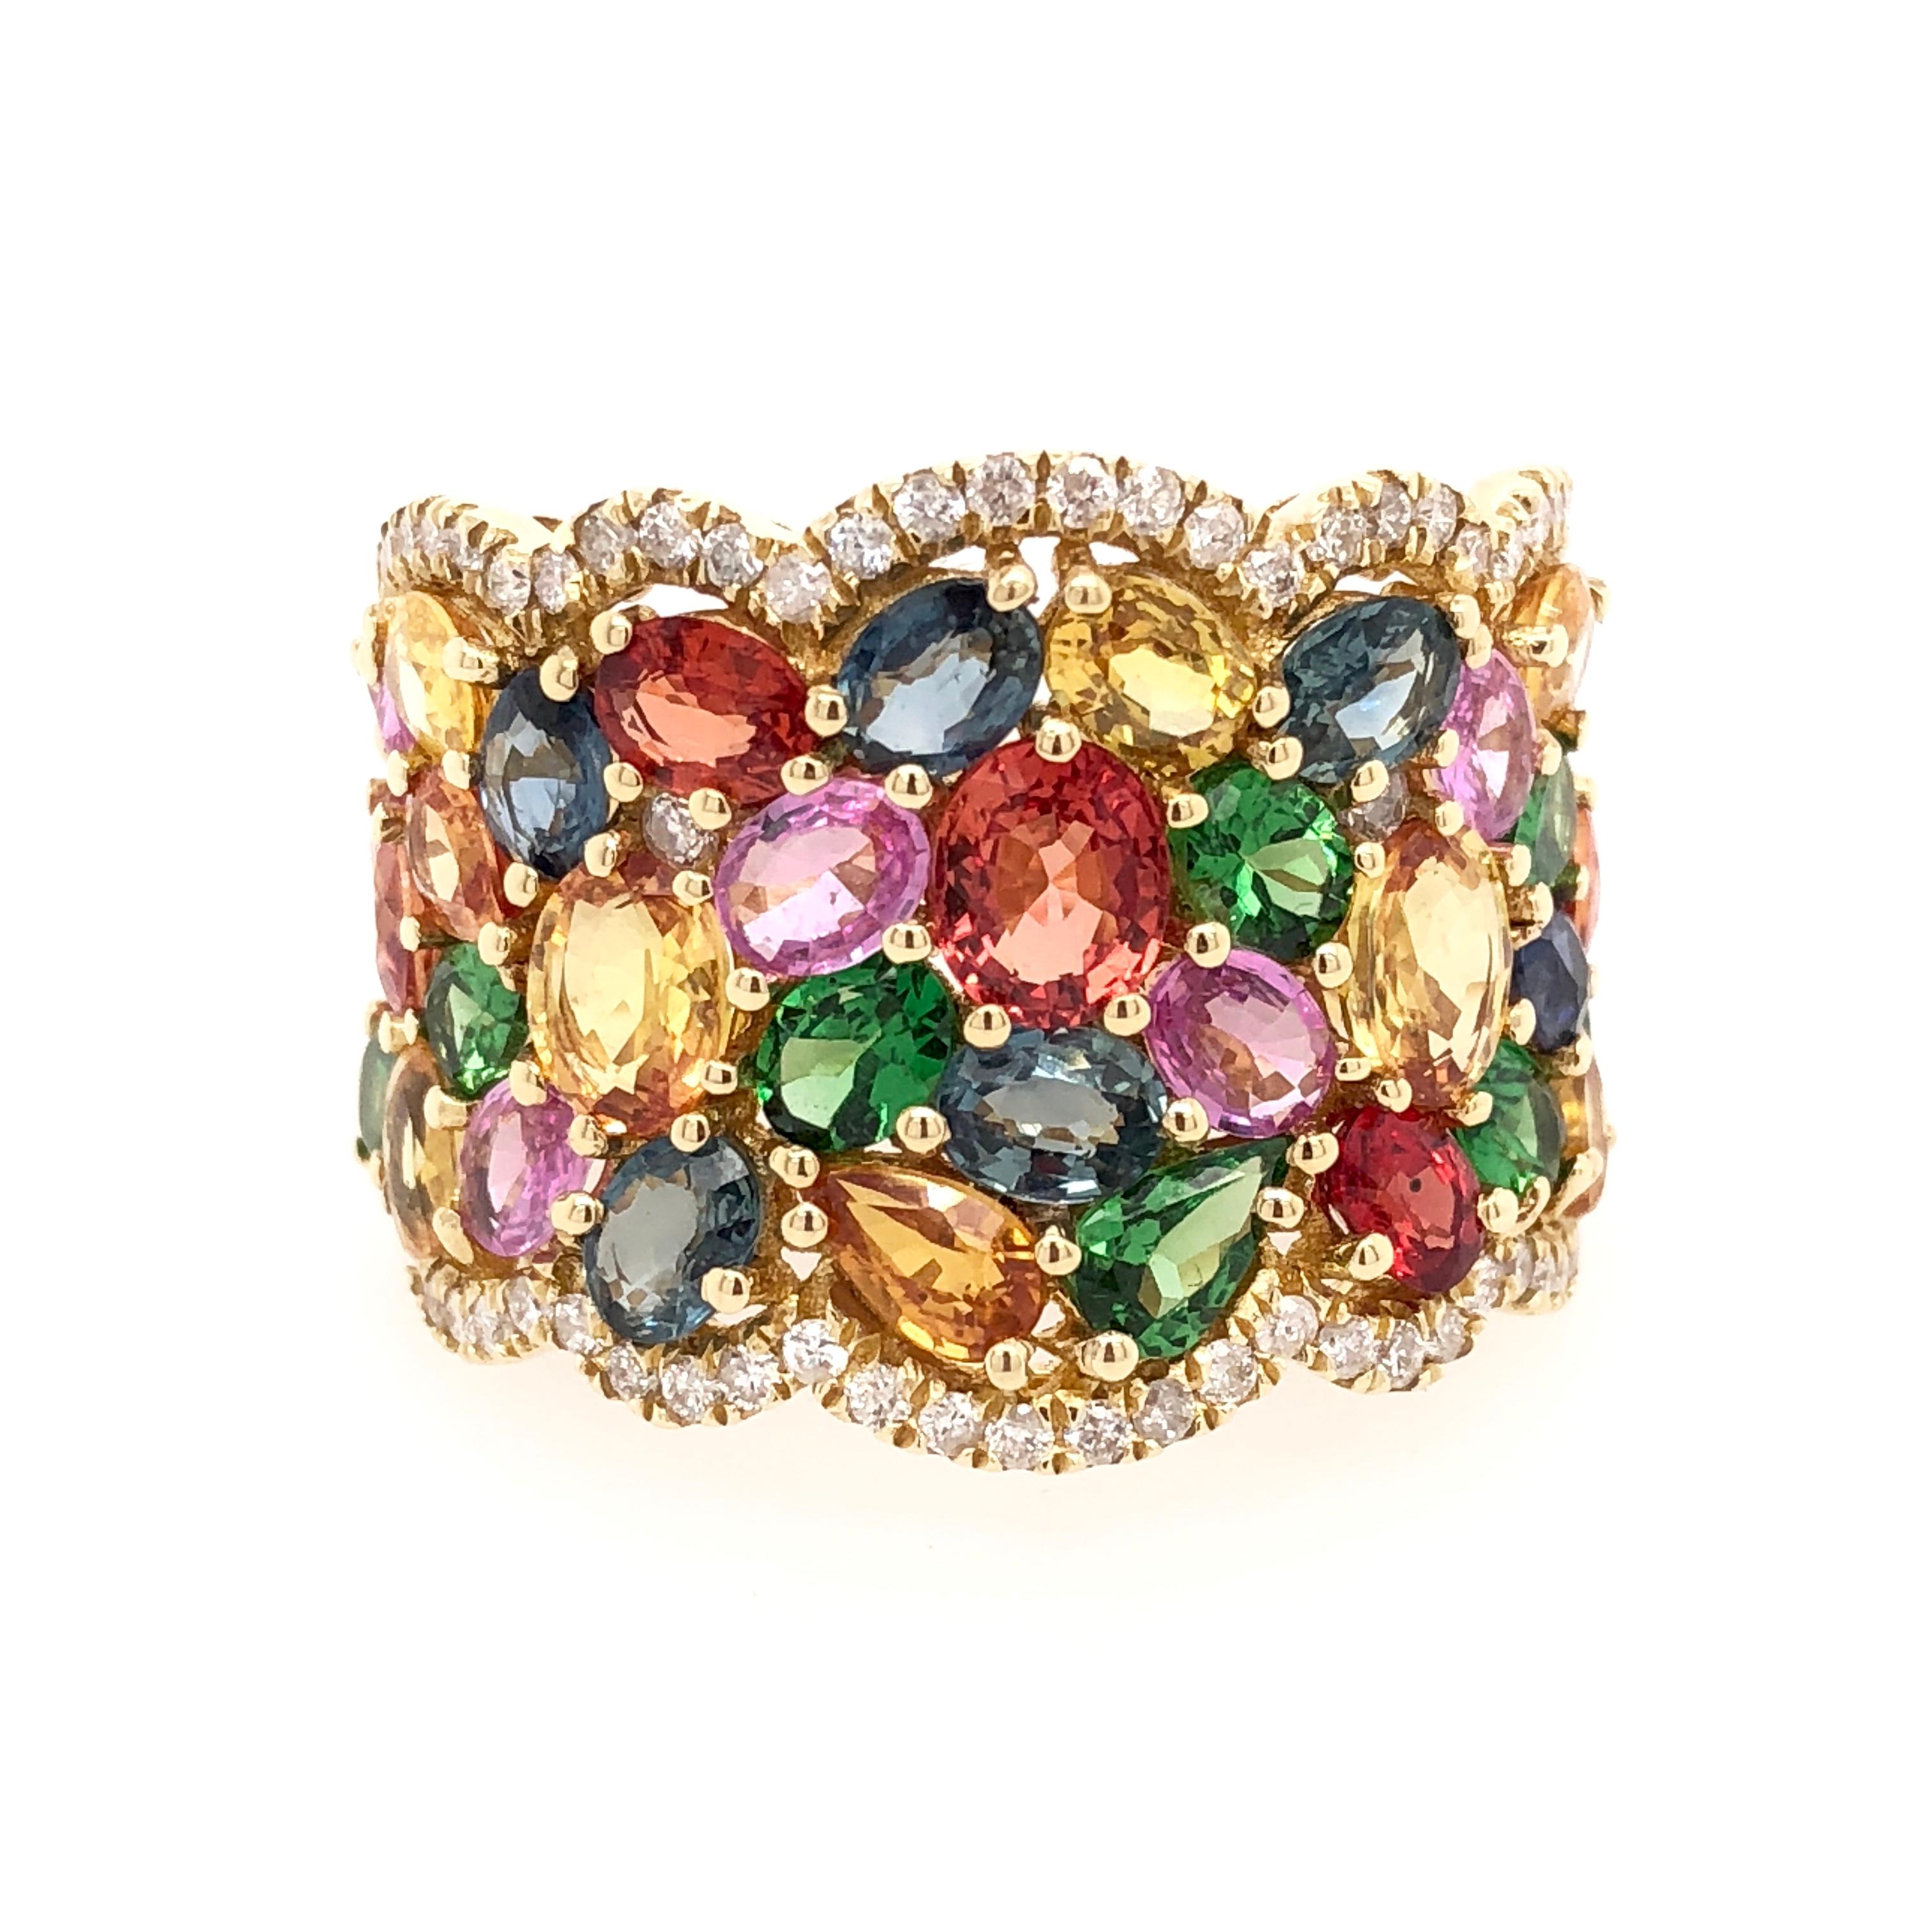 Play of Colors Collection

Multi color Sapphire and Diamond ring set in 18K yellow gold. 

Multi Sapphire: 7.57ct total weight.
All diamonds are G-H/SI stones.
